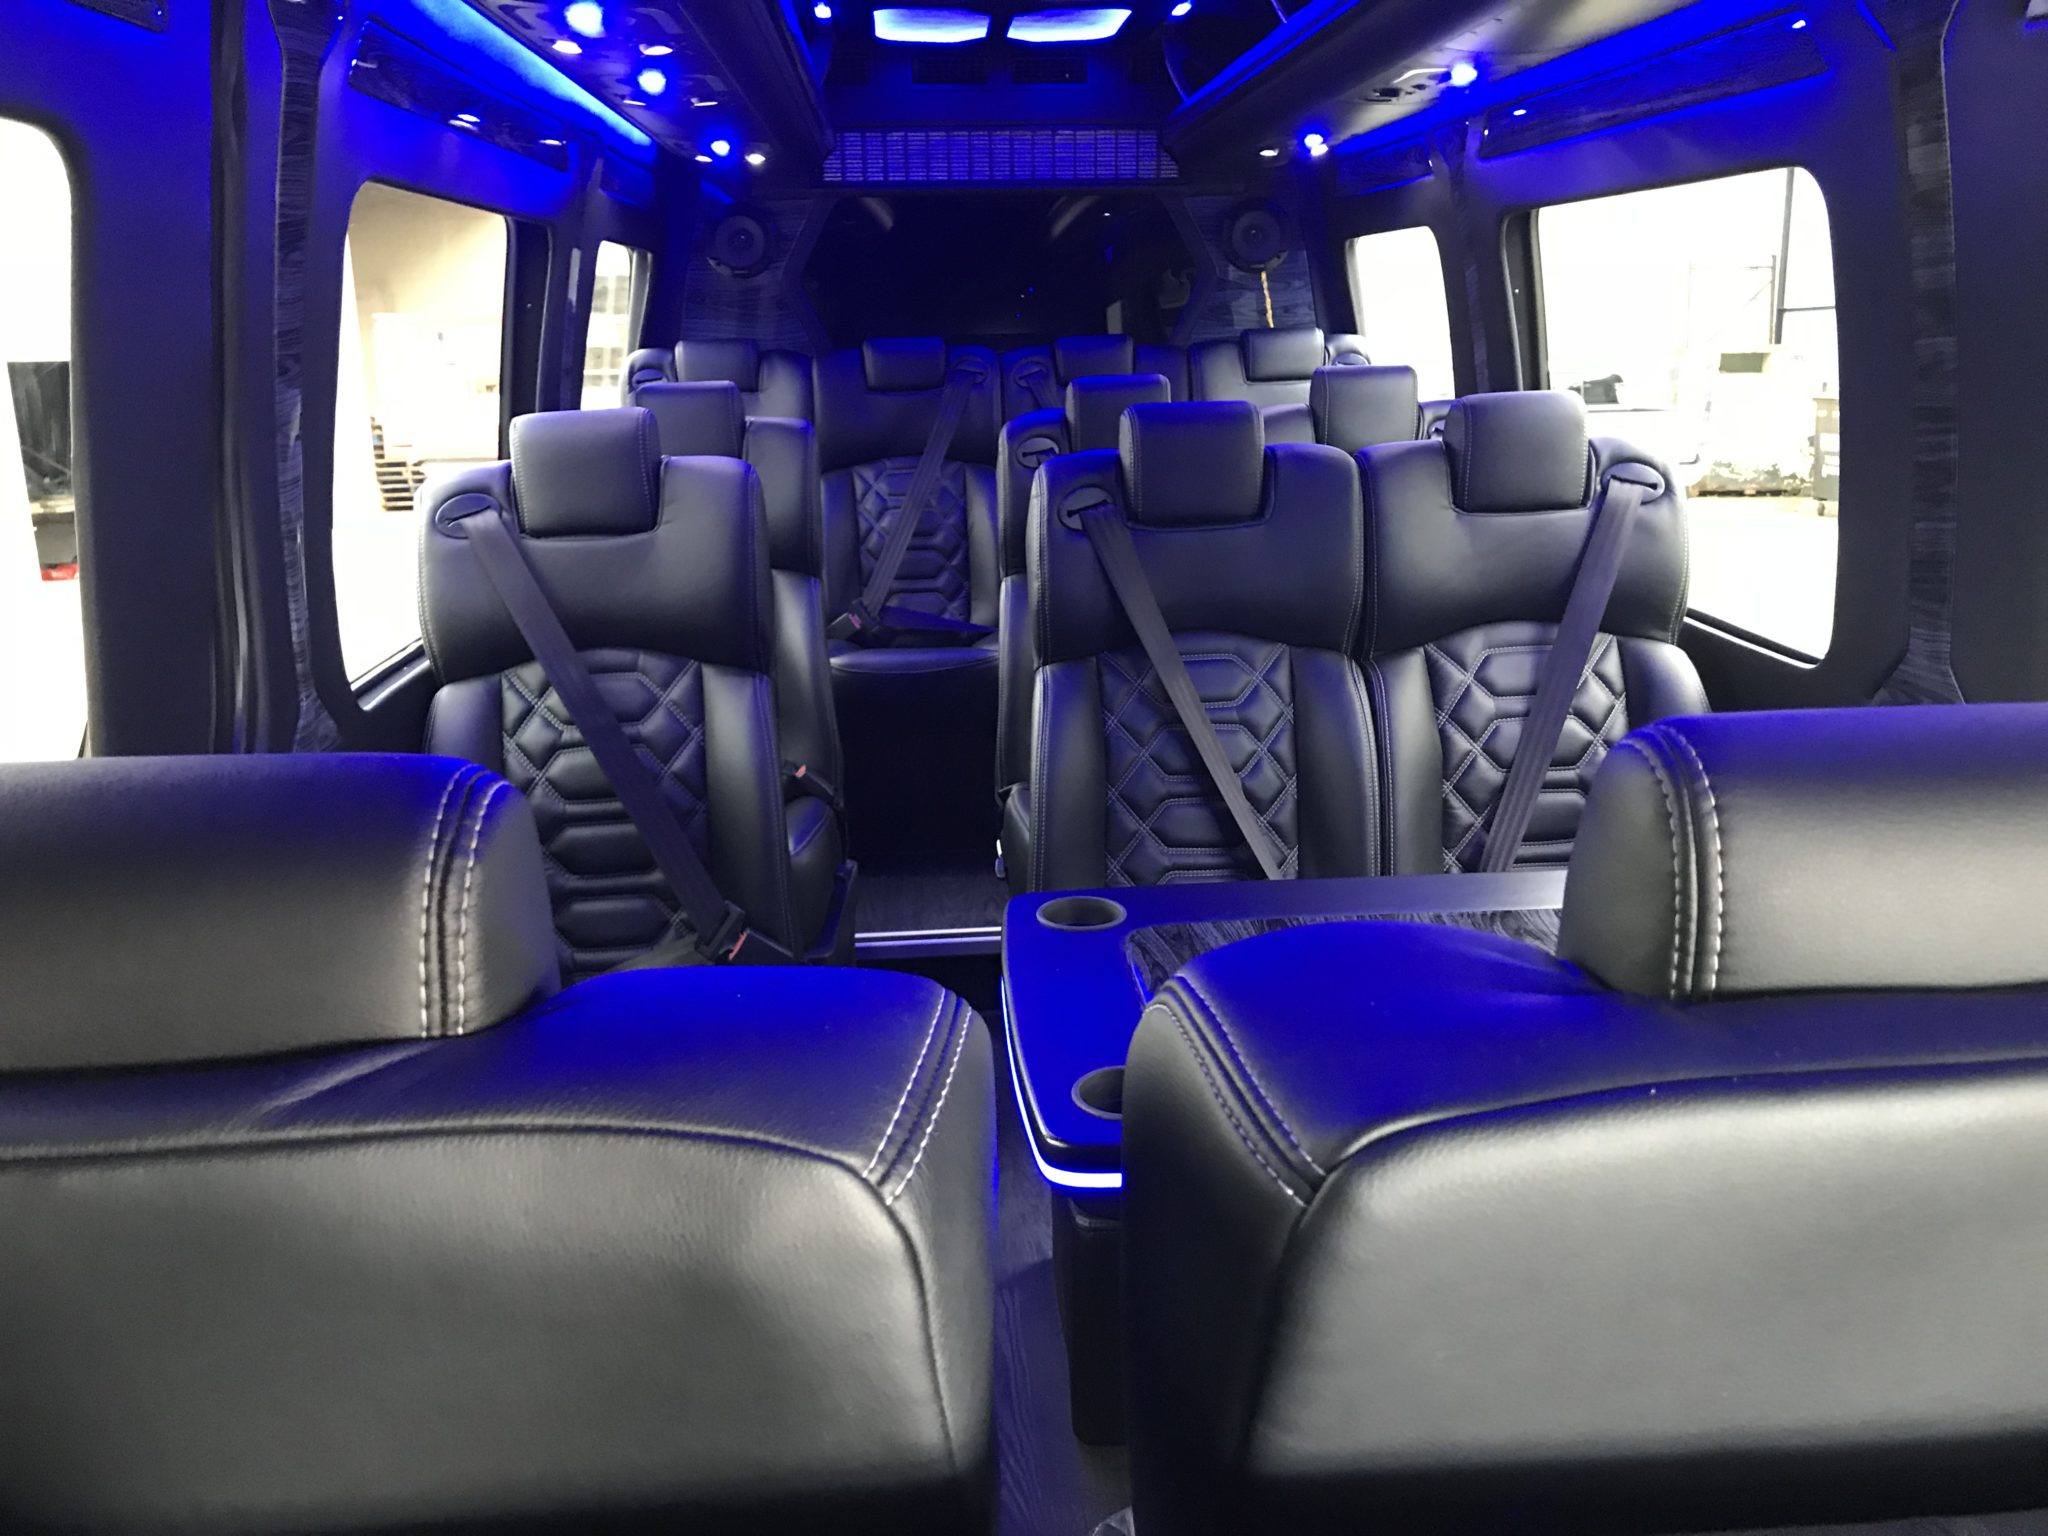 Leather Seating & Wooden Flooring -The Latest in Luxury Travel from Best Trails & Travel